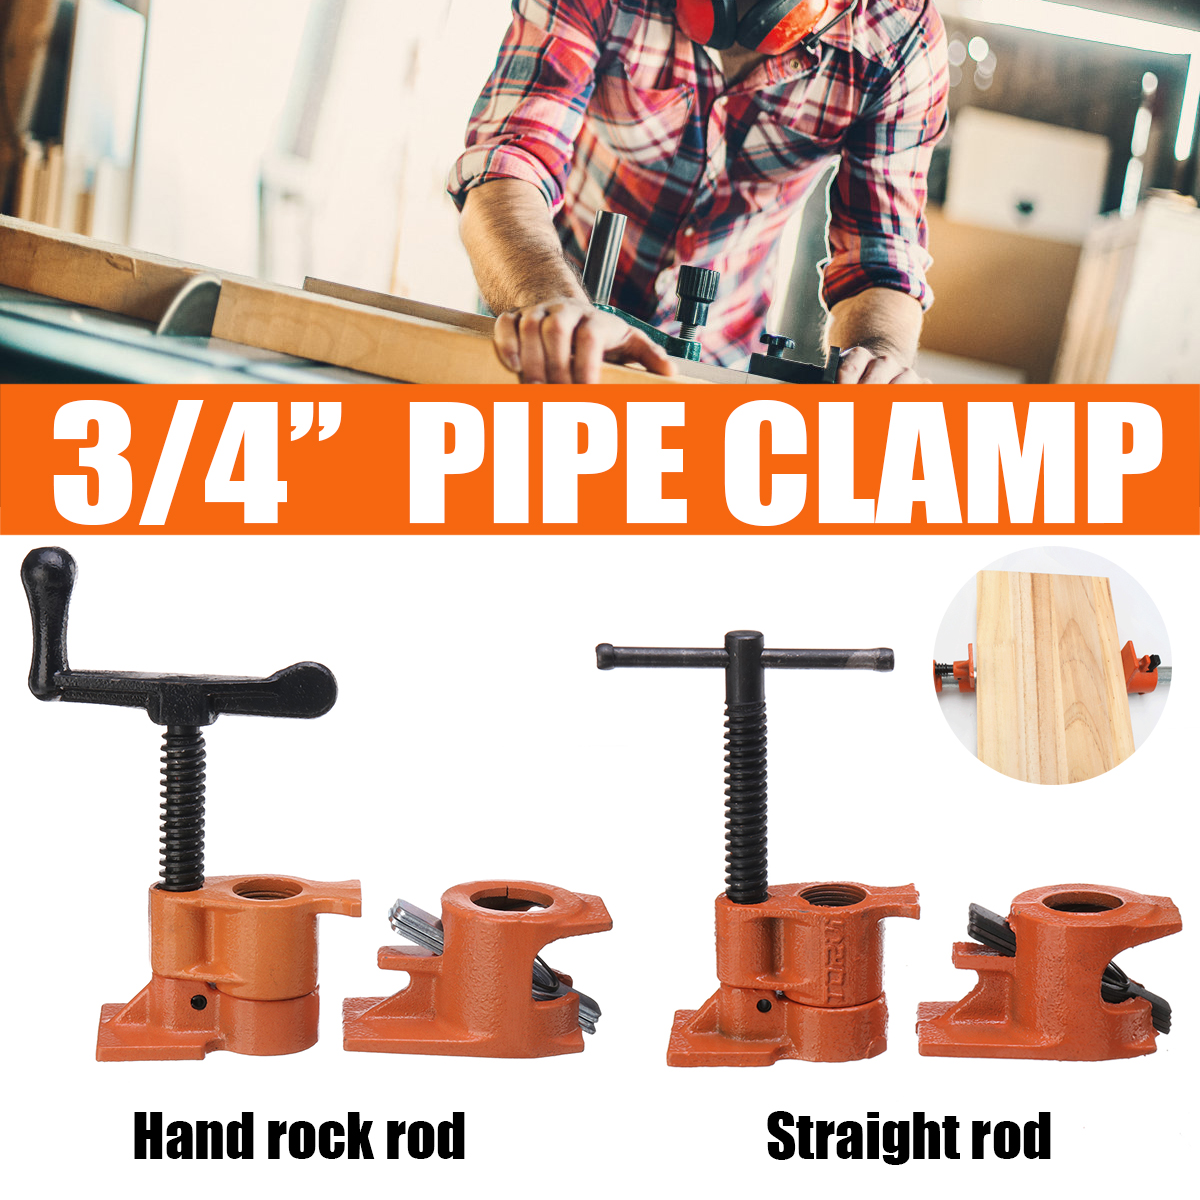 Wood-Gluing-Pipe-Clamp-34-Inch-Heavy-Duty-Woodworking-Cast-Iron-Pipe-Clamp-1471416-3